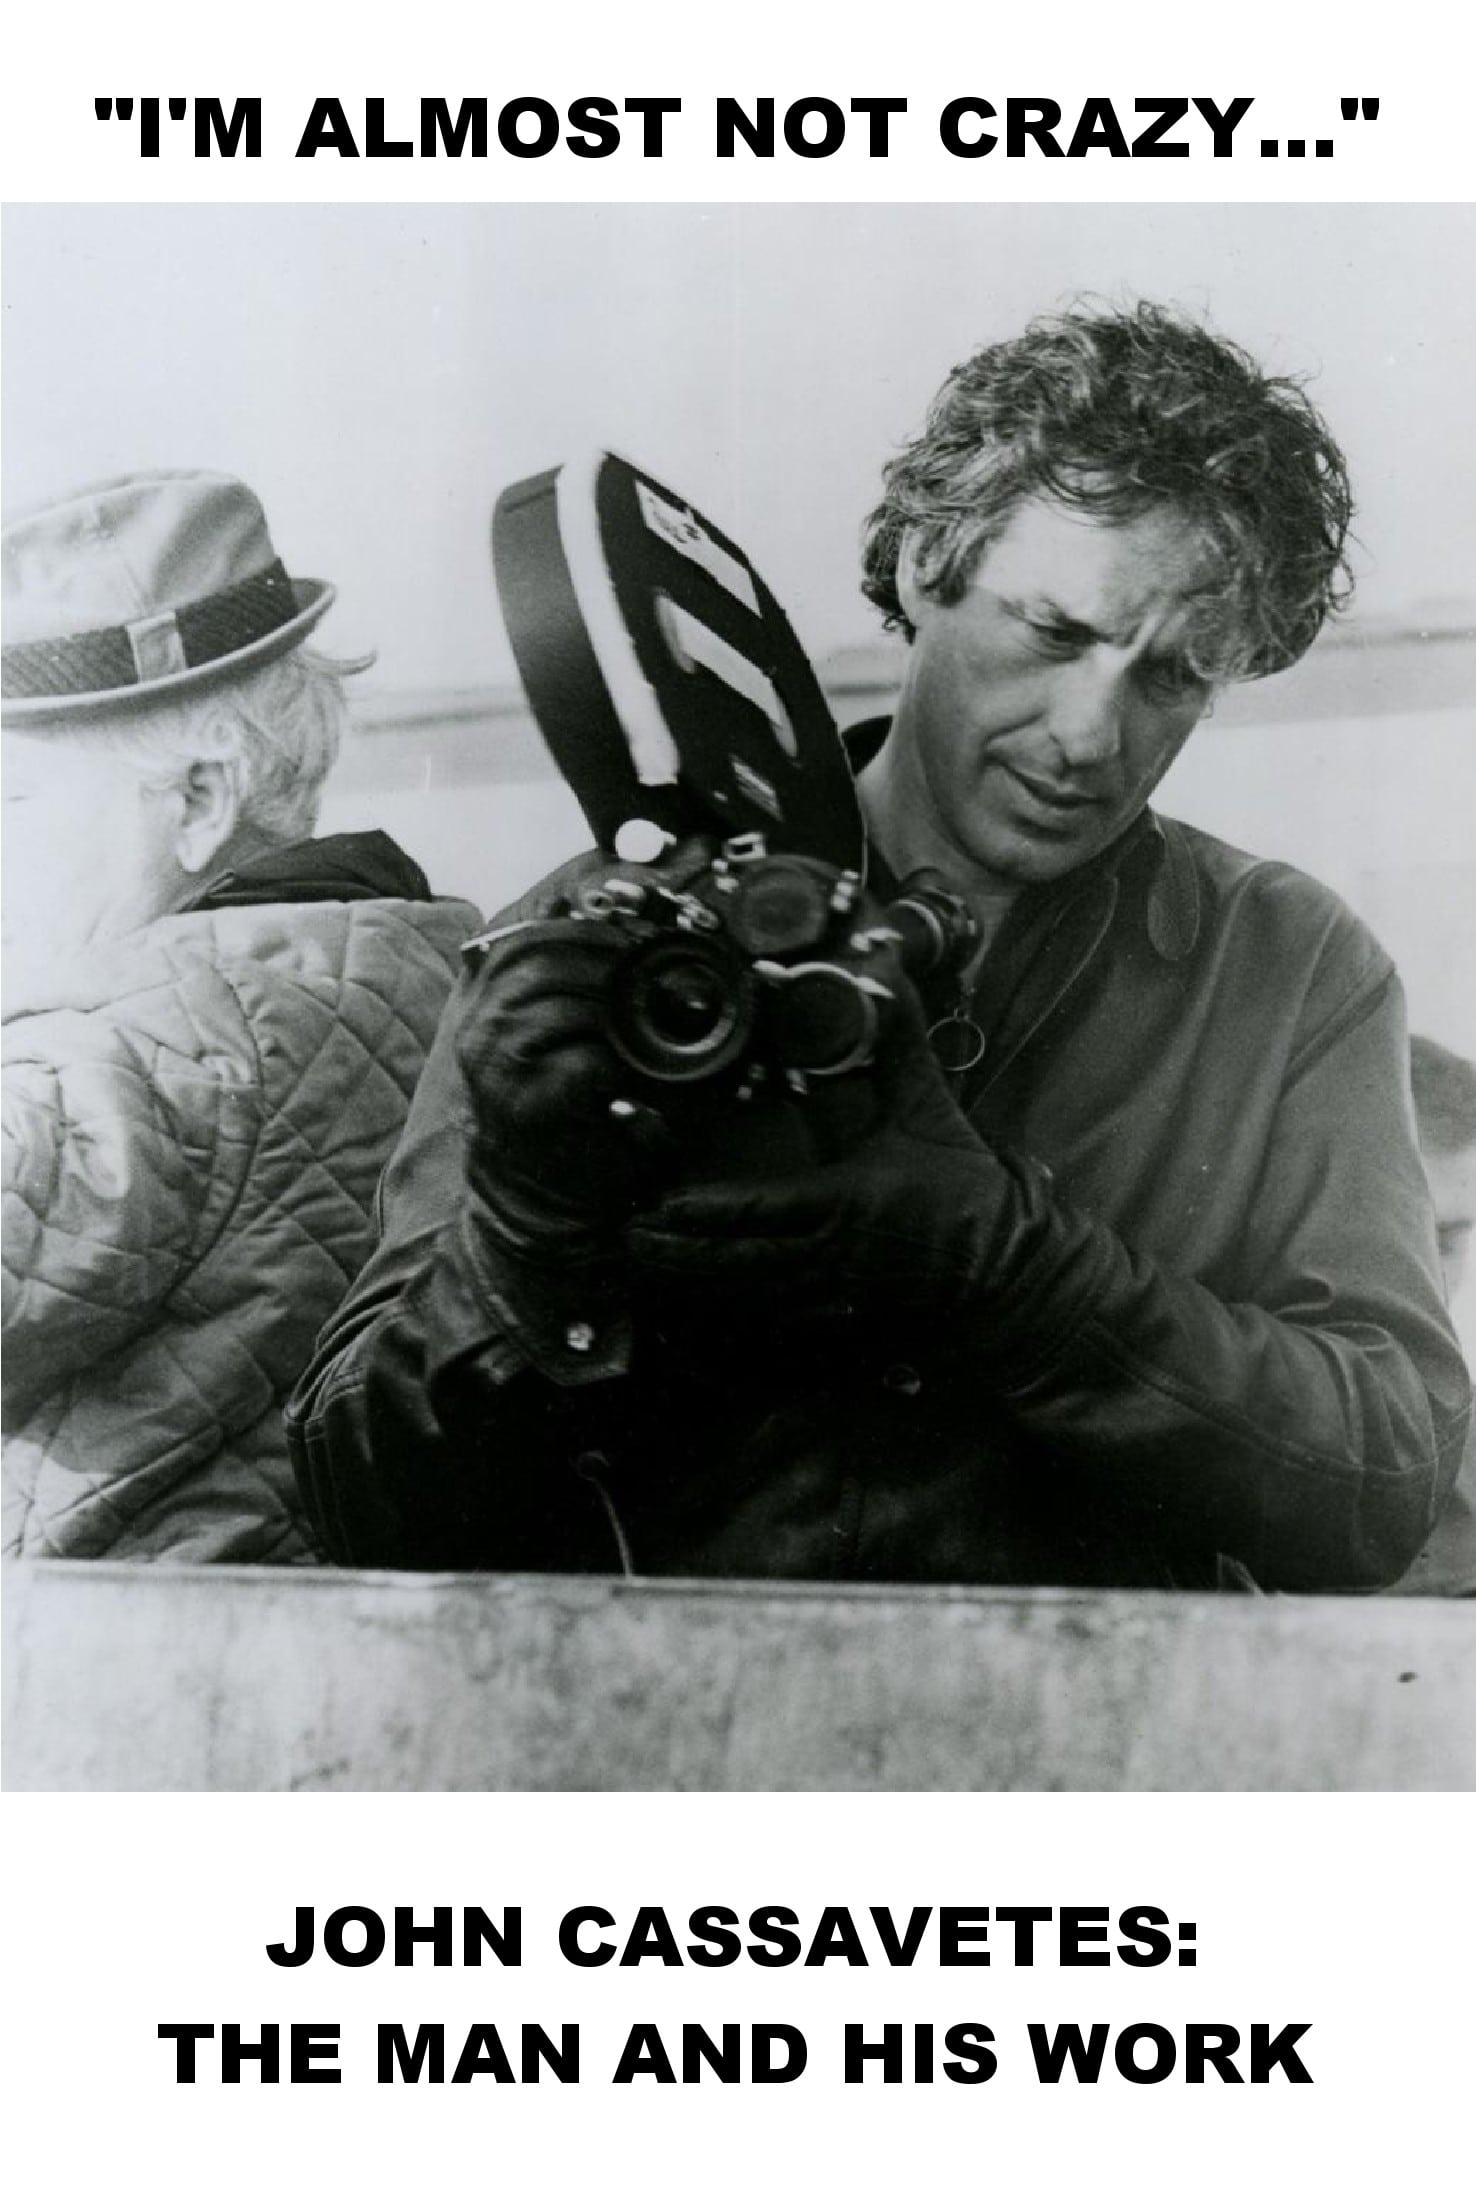 I'm Almost Not Crazy: John Cassavetes - The Man and His Work (1984)